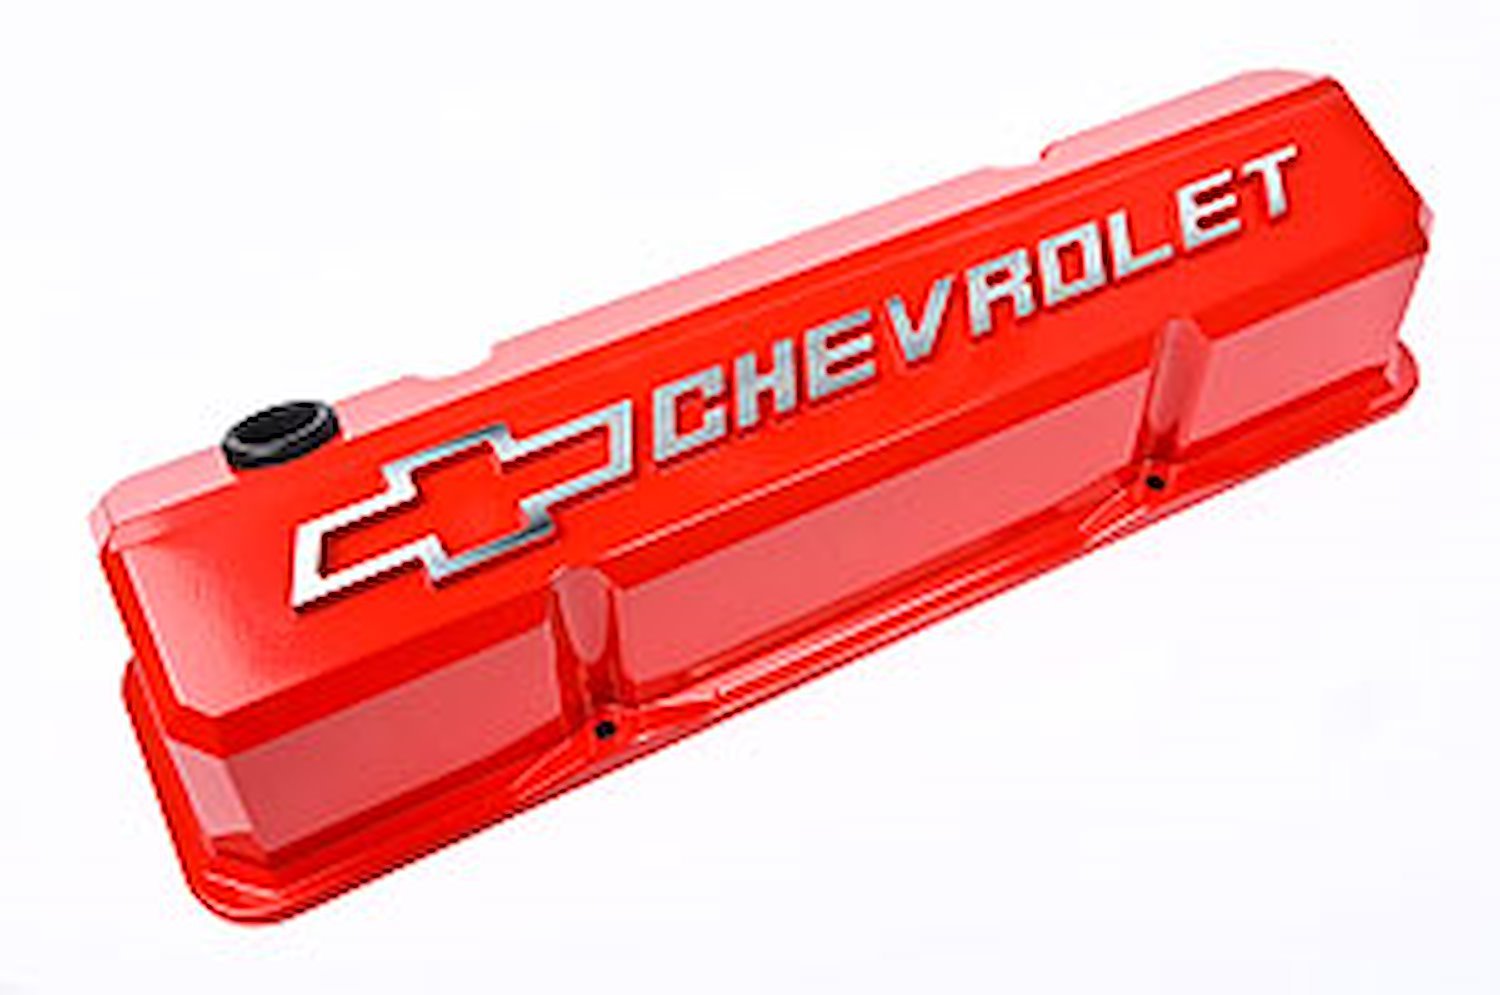 Die-Cast Slant-Edge Valve Covers for 1958-1986 Small Block Chevy with Chevrolet/Bowtie Raised Emblem in Red Finish